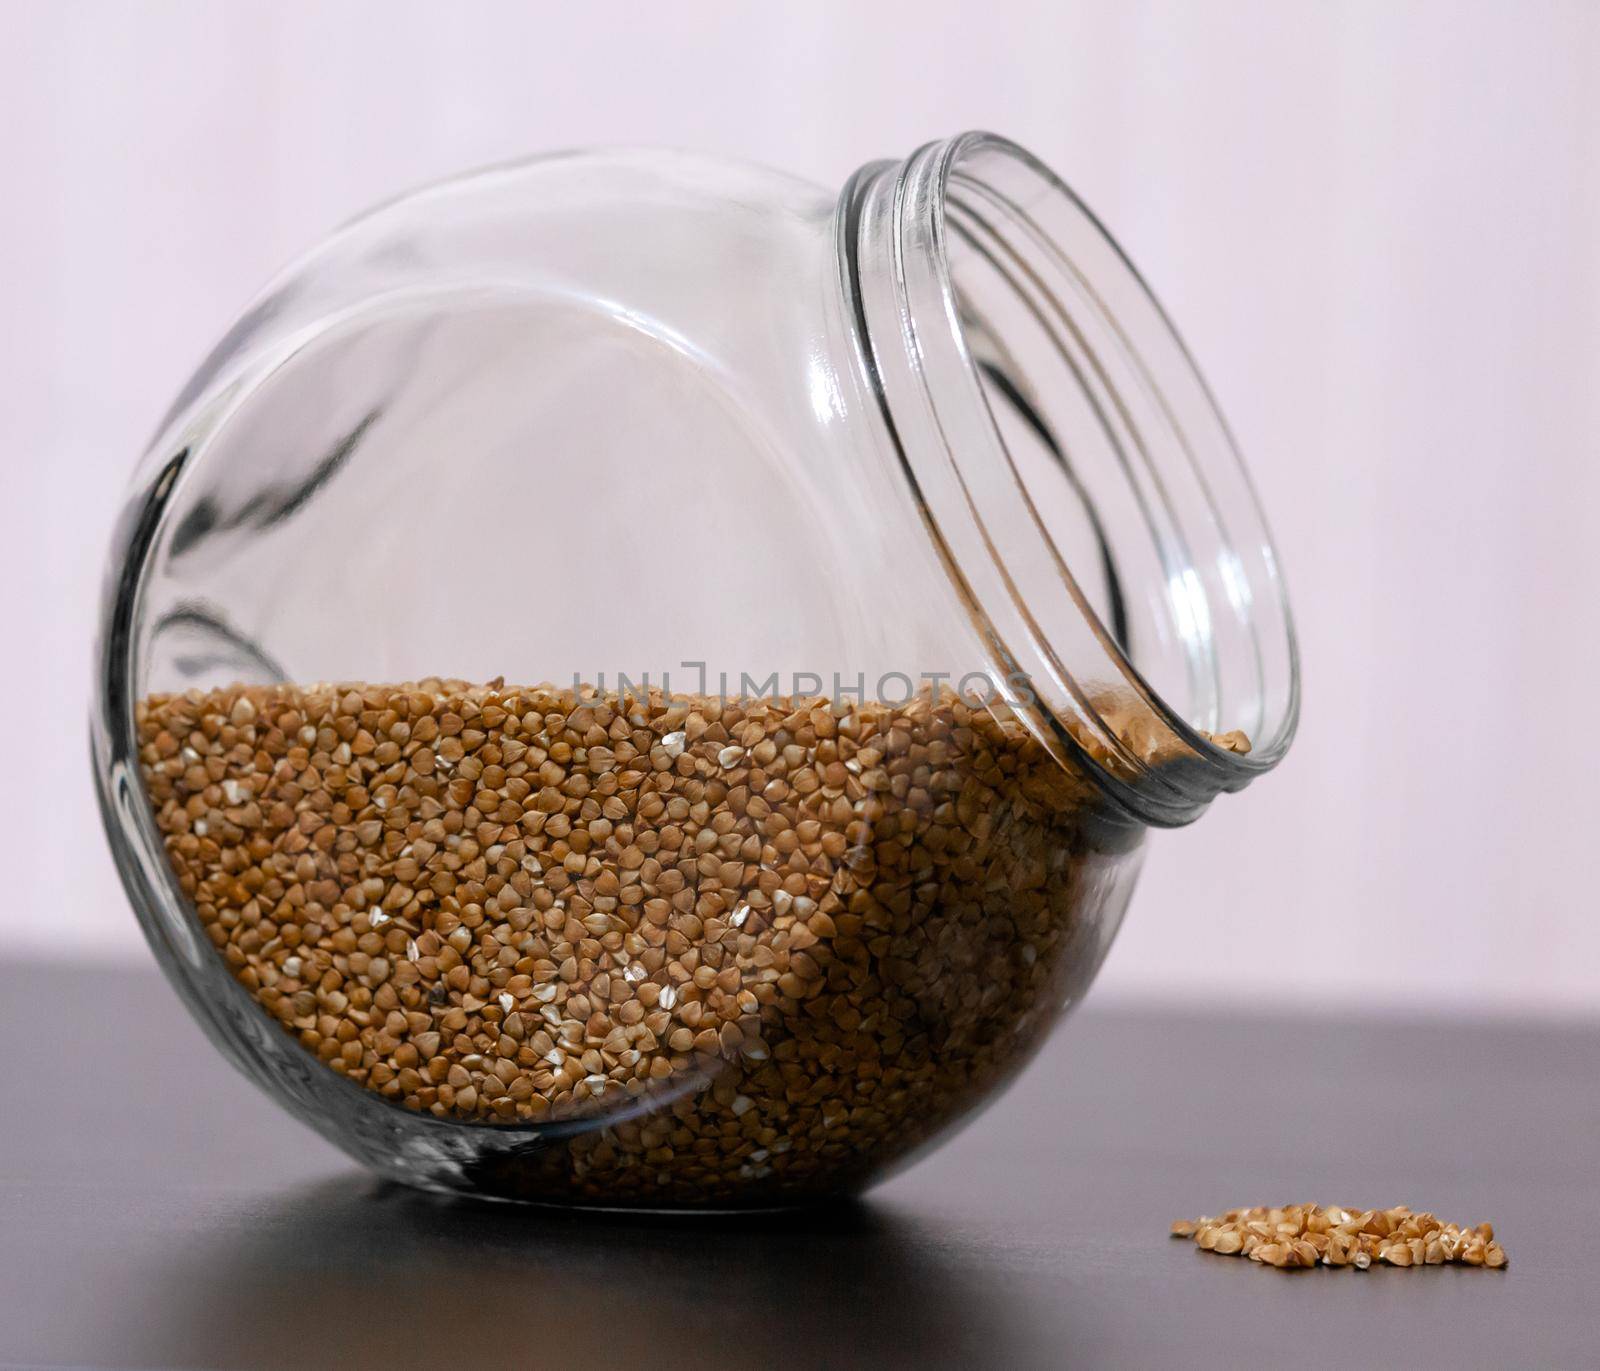 Healthy food buckwheat in a glass jar is on the table